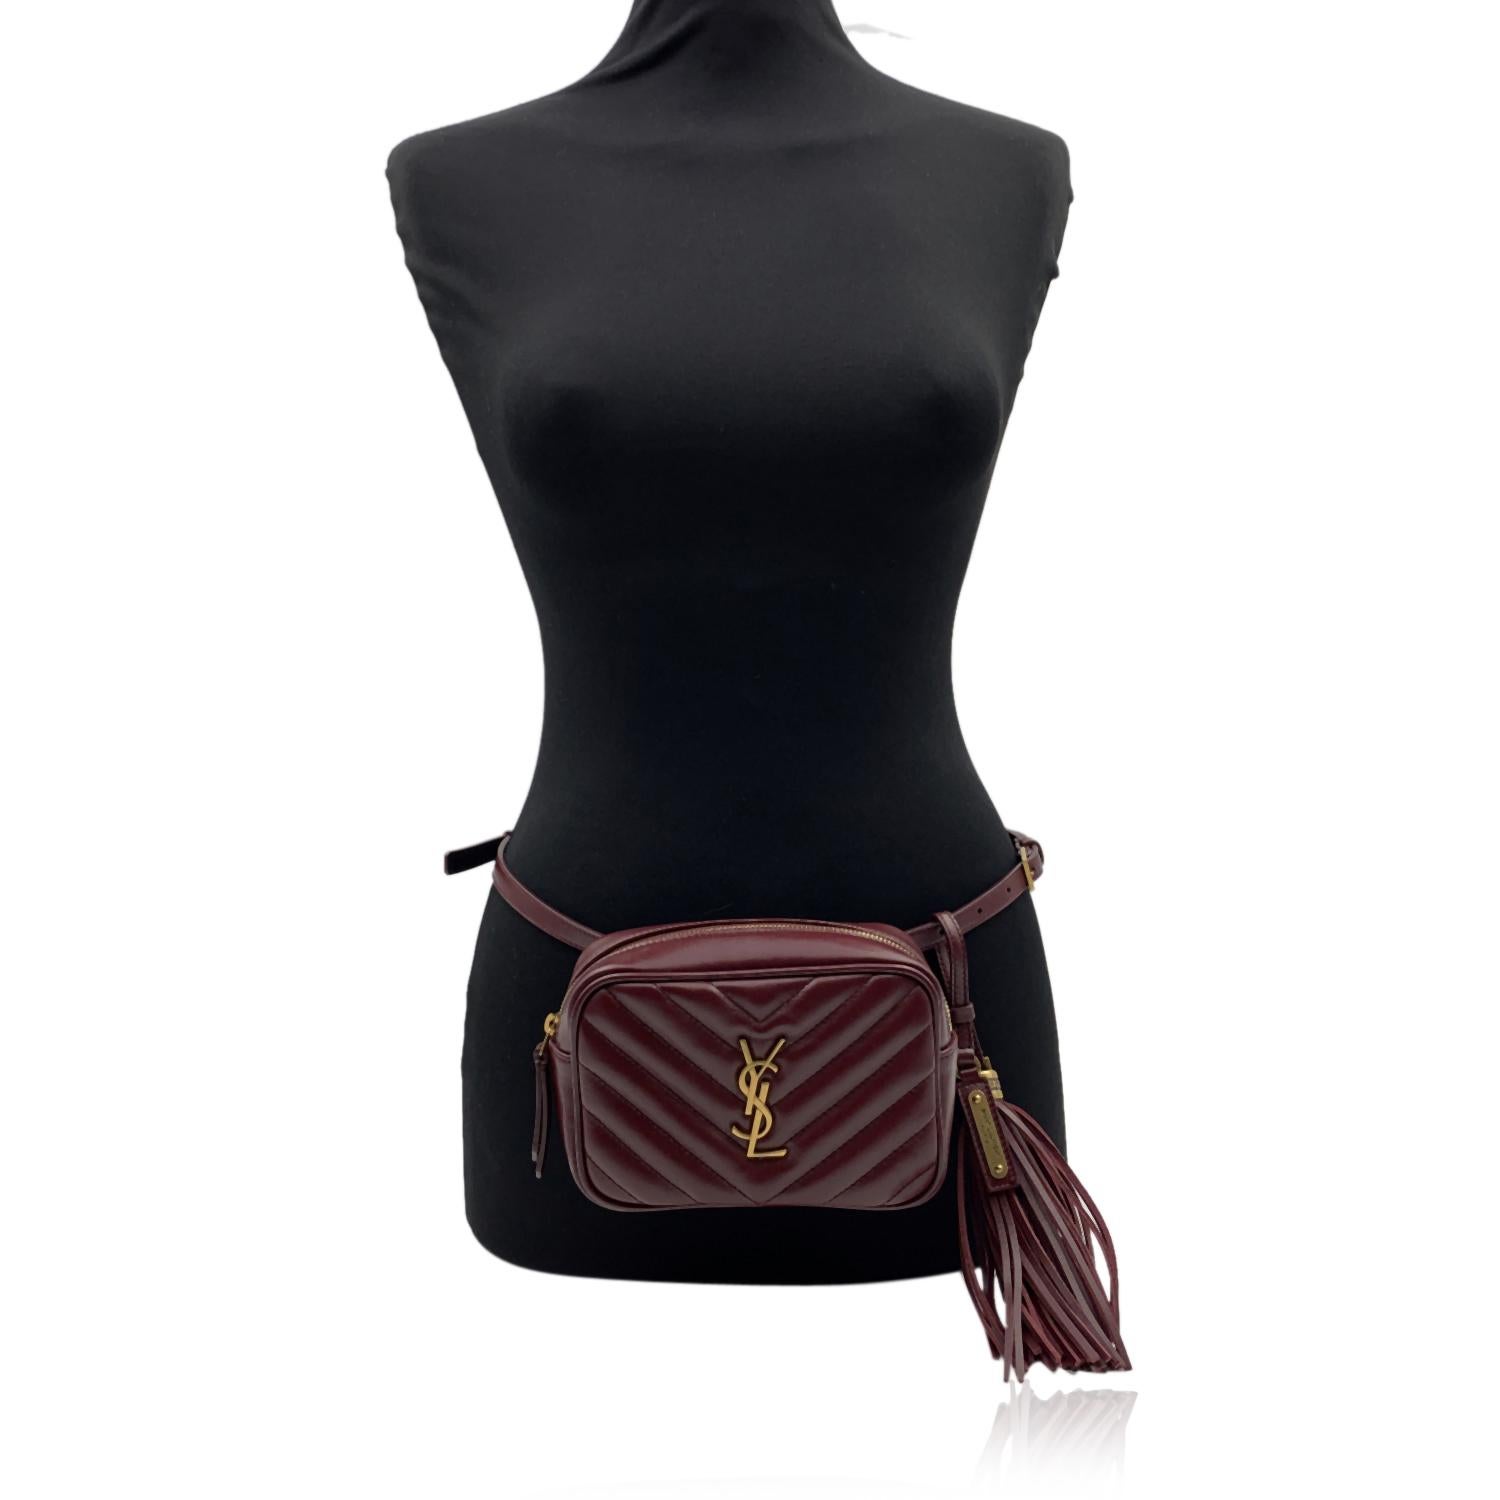 YVES SAINT LAURENT 'Lou' belt bag in burgundy quilted leather. The bag features a v-quilted pattern, gold metal YSL logo on the front and a removable leather tassel. Adjustable burgundy belt (can be adjusted from 65-110 cm). 1 zip pocket on the